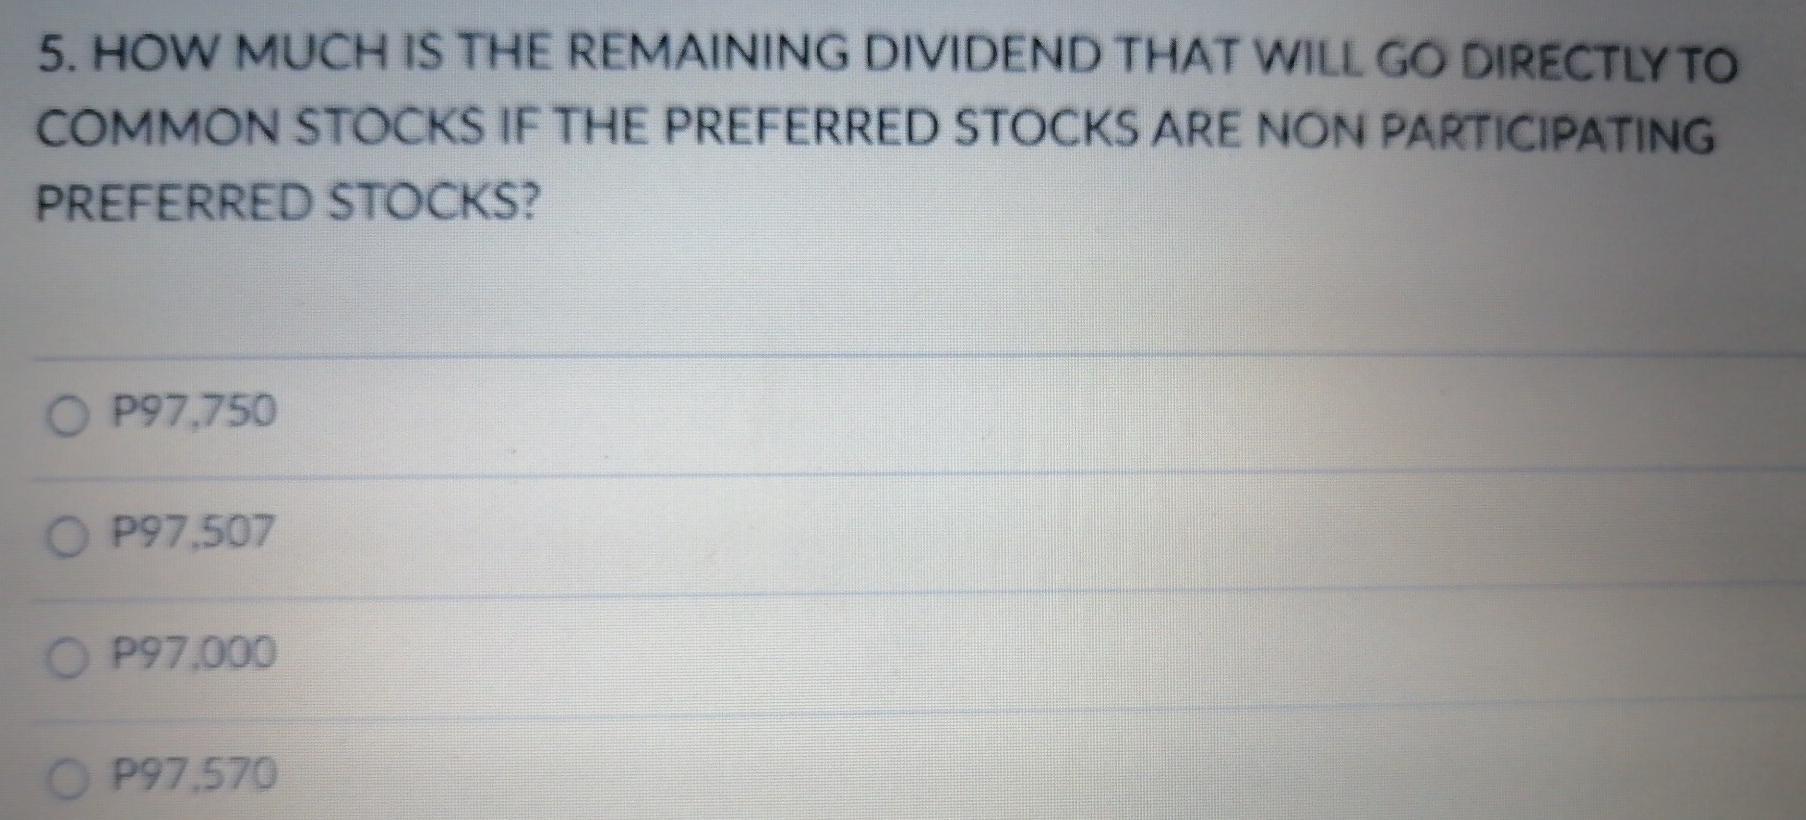 5. HOW MUCH IS THE REMAINING DIVIDEND THAT WILL GO DIRECTLY TOCOMMON STOCKS IF THE PREFERRED STOCKS ARE NON PARTICIPATINGPR